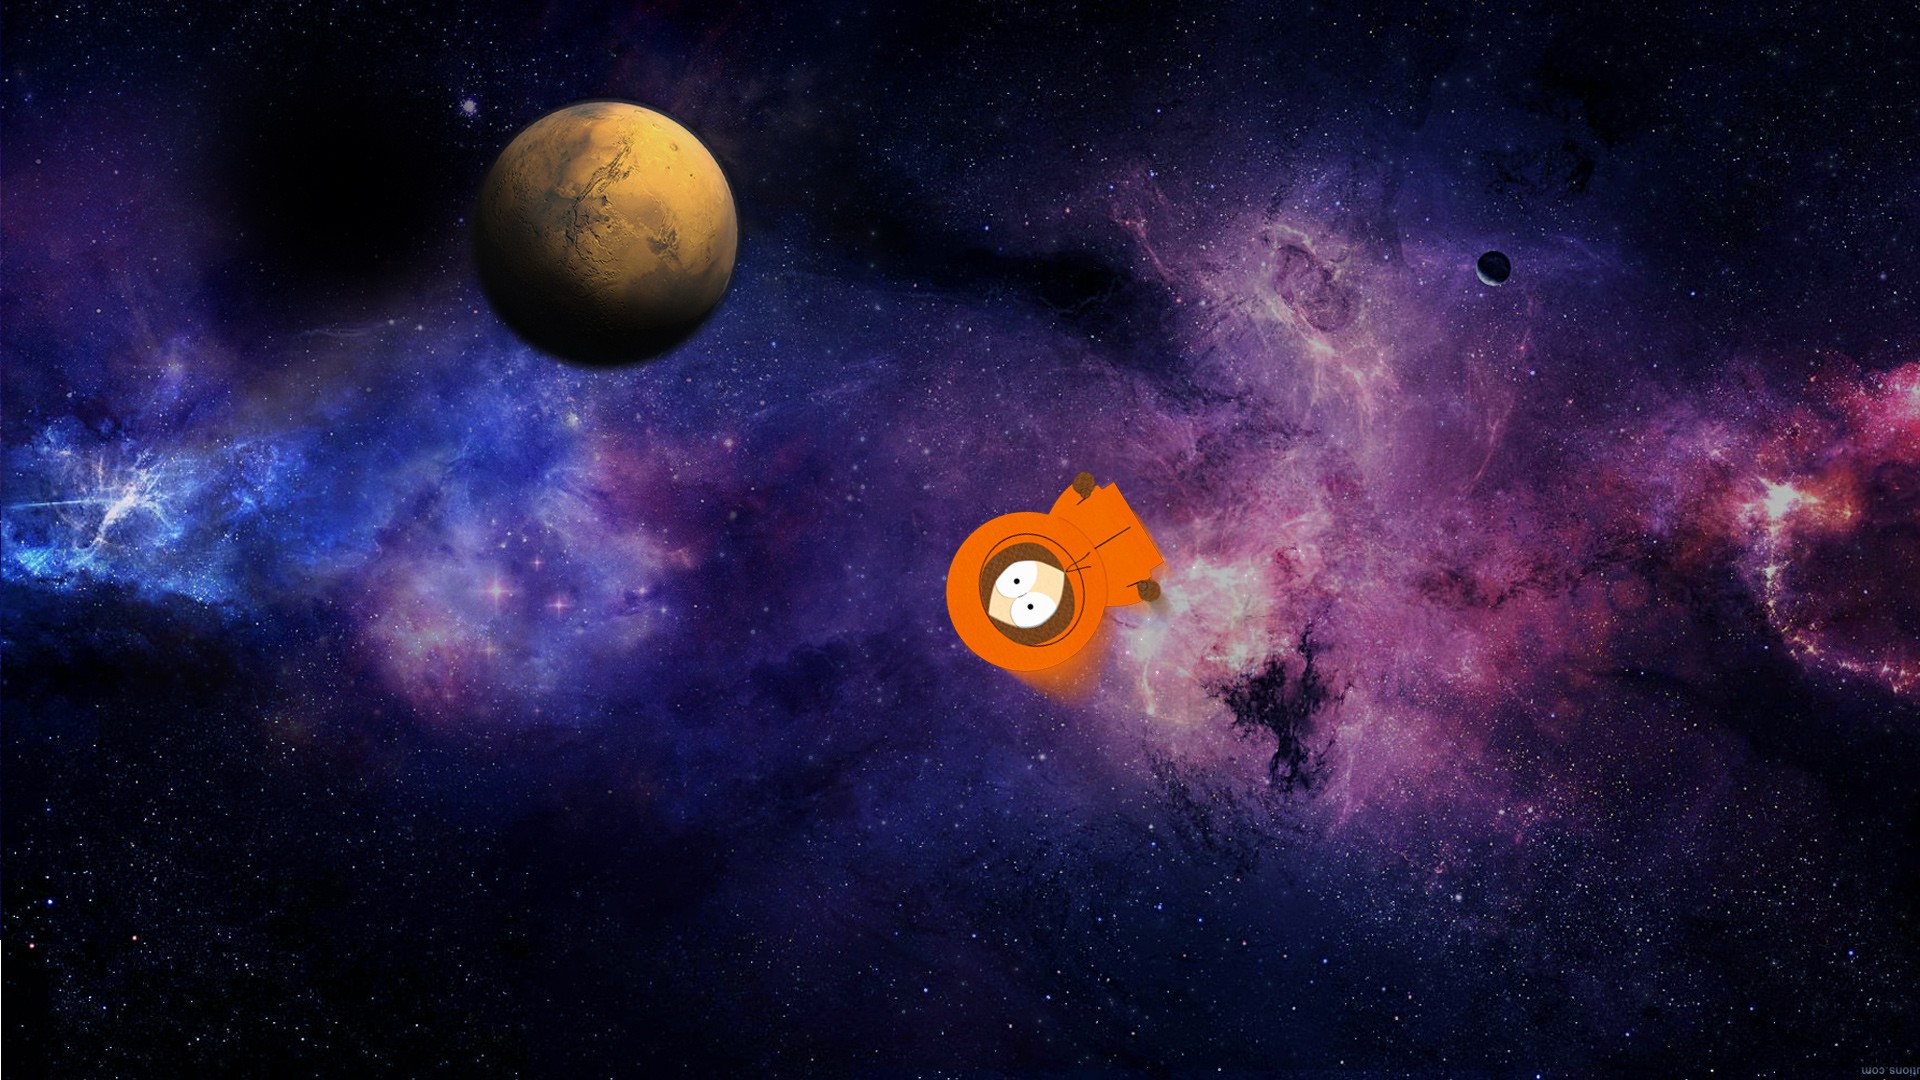 Kenny McCormick South Park Space 1920x1080